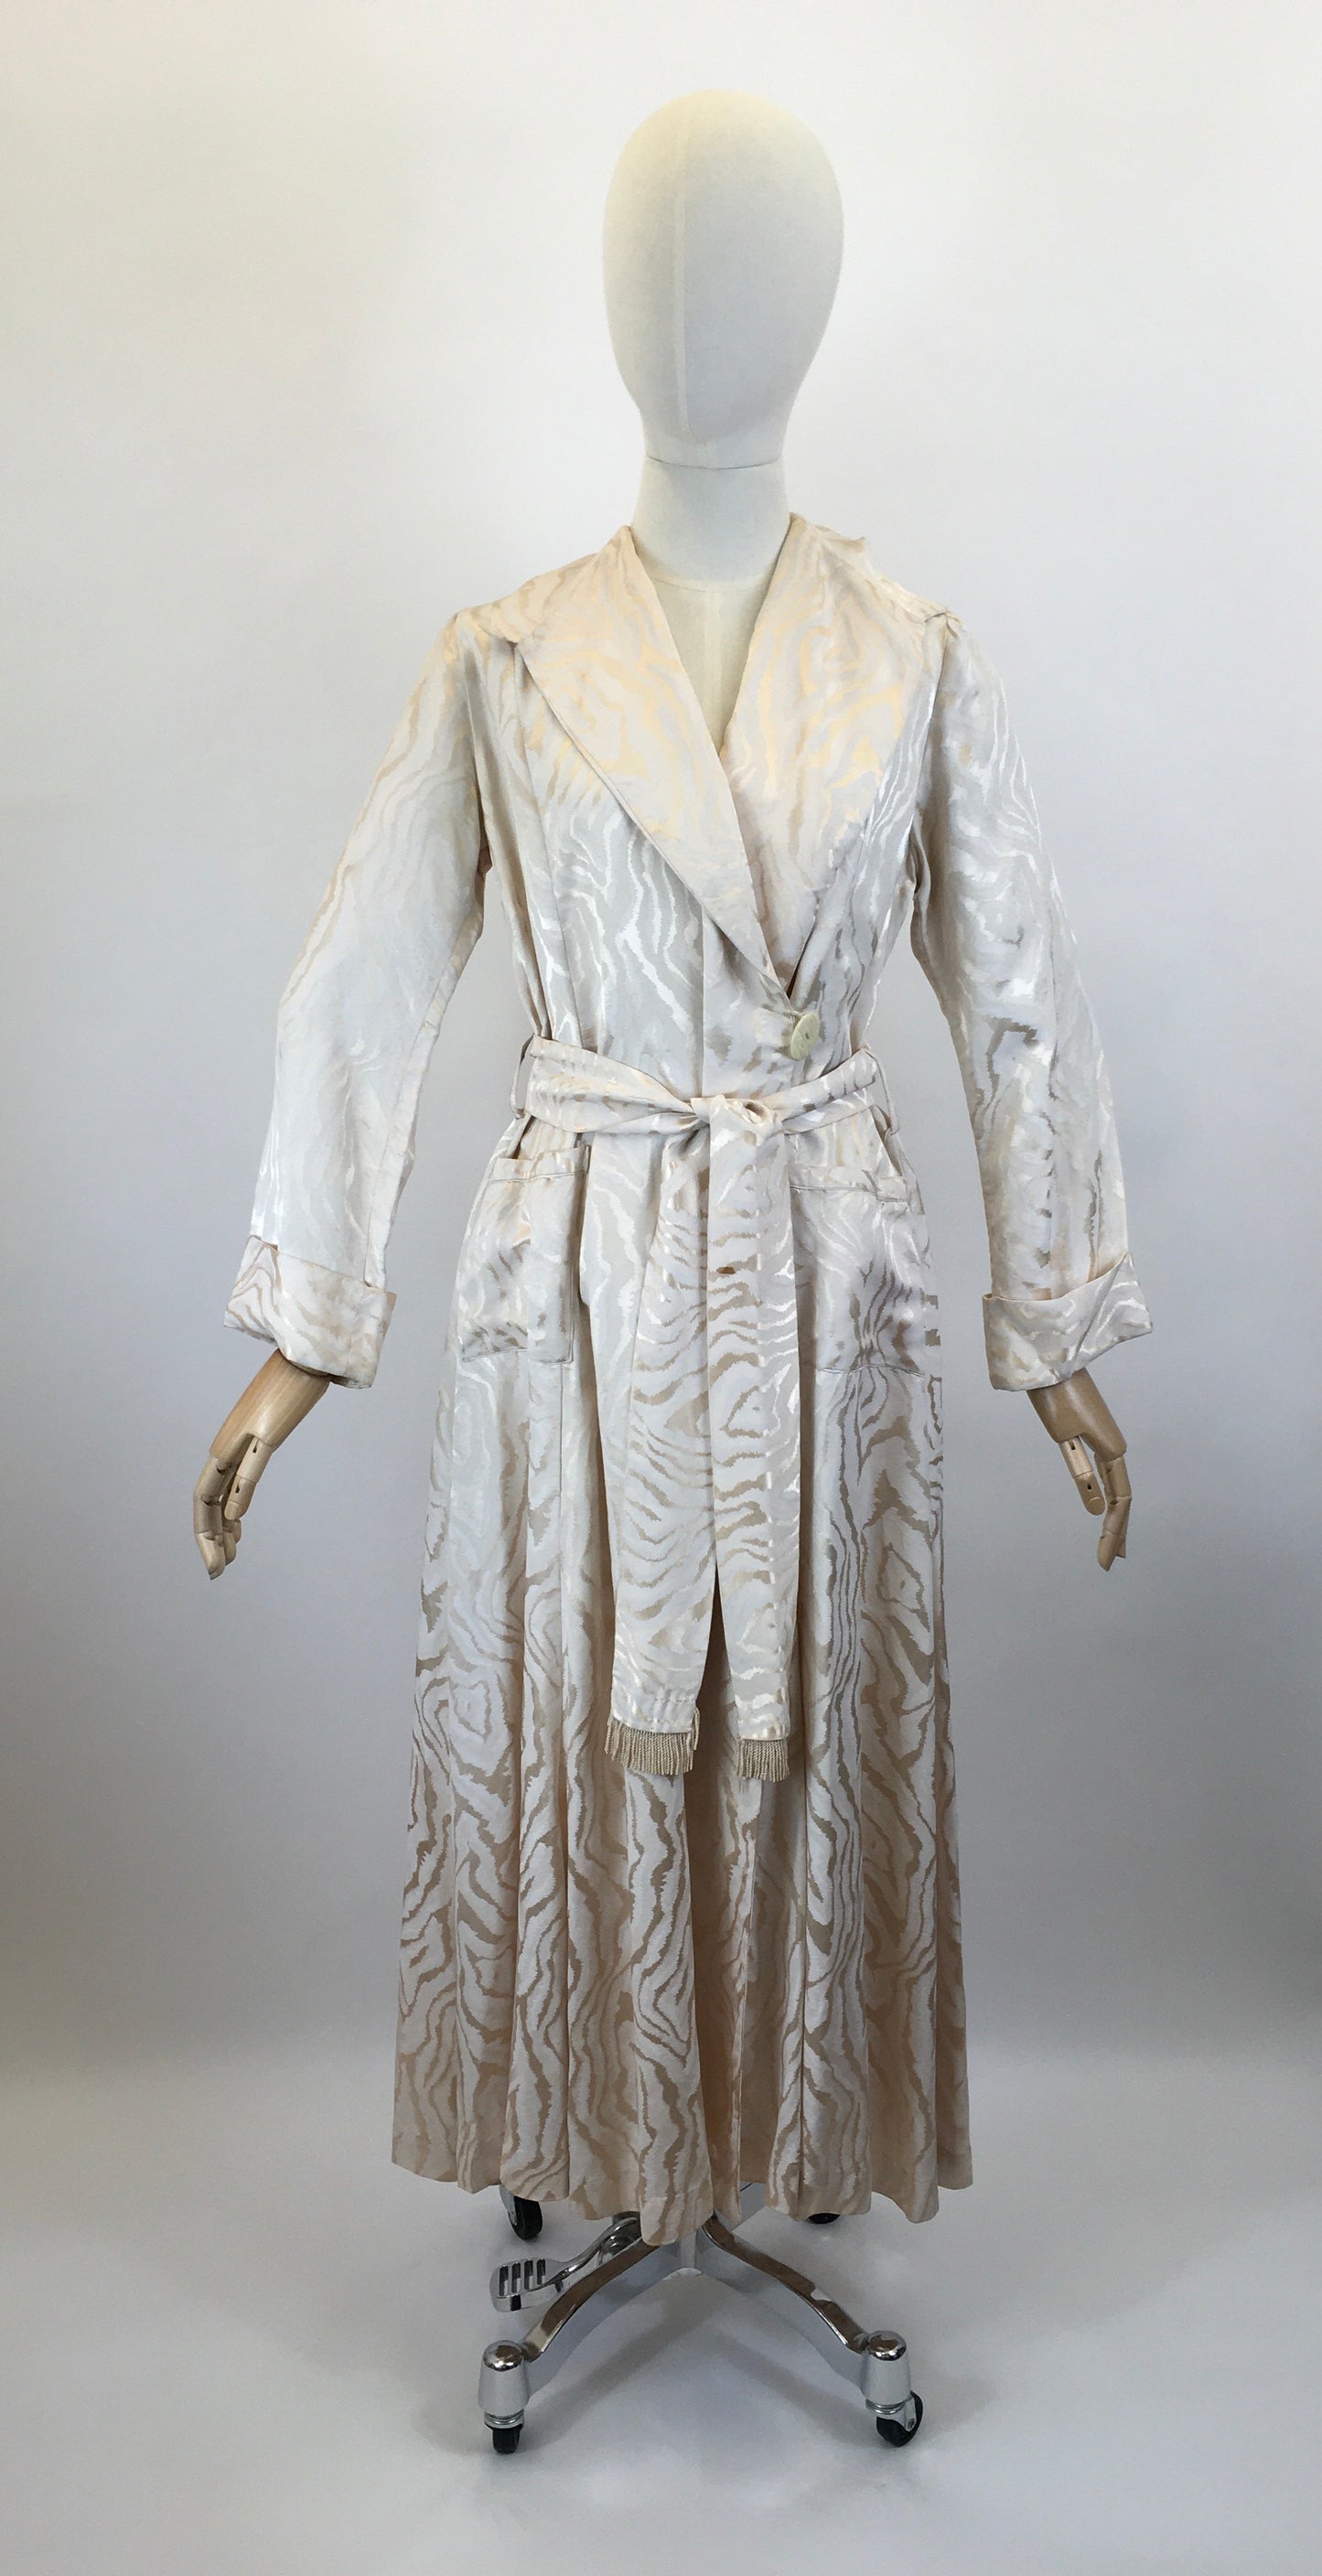 Original 1940’s Stunning Housecoat - In A Cream & Gold Printed Brocade with Tasseled Belt